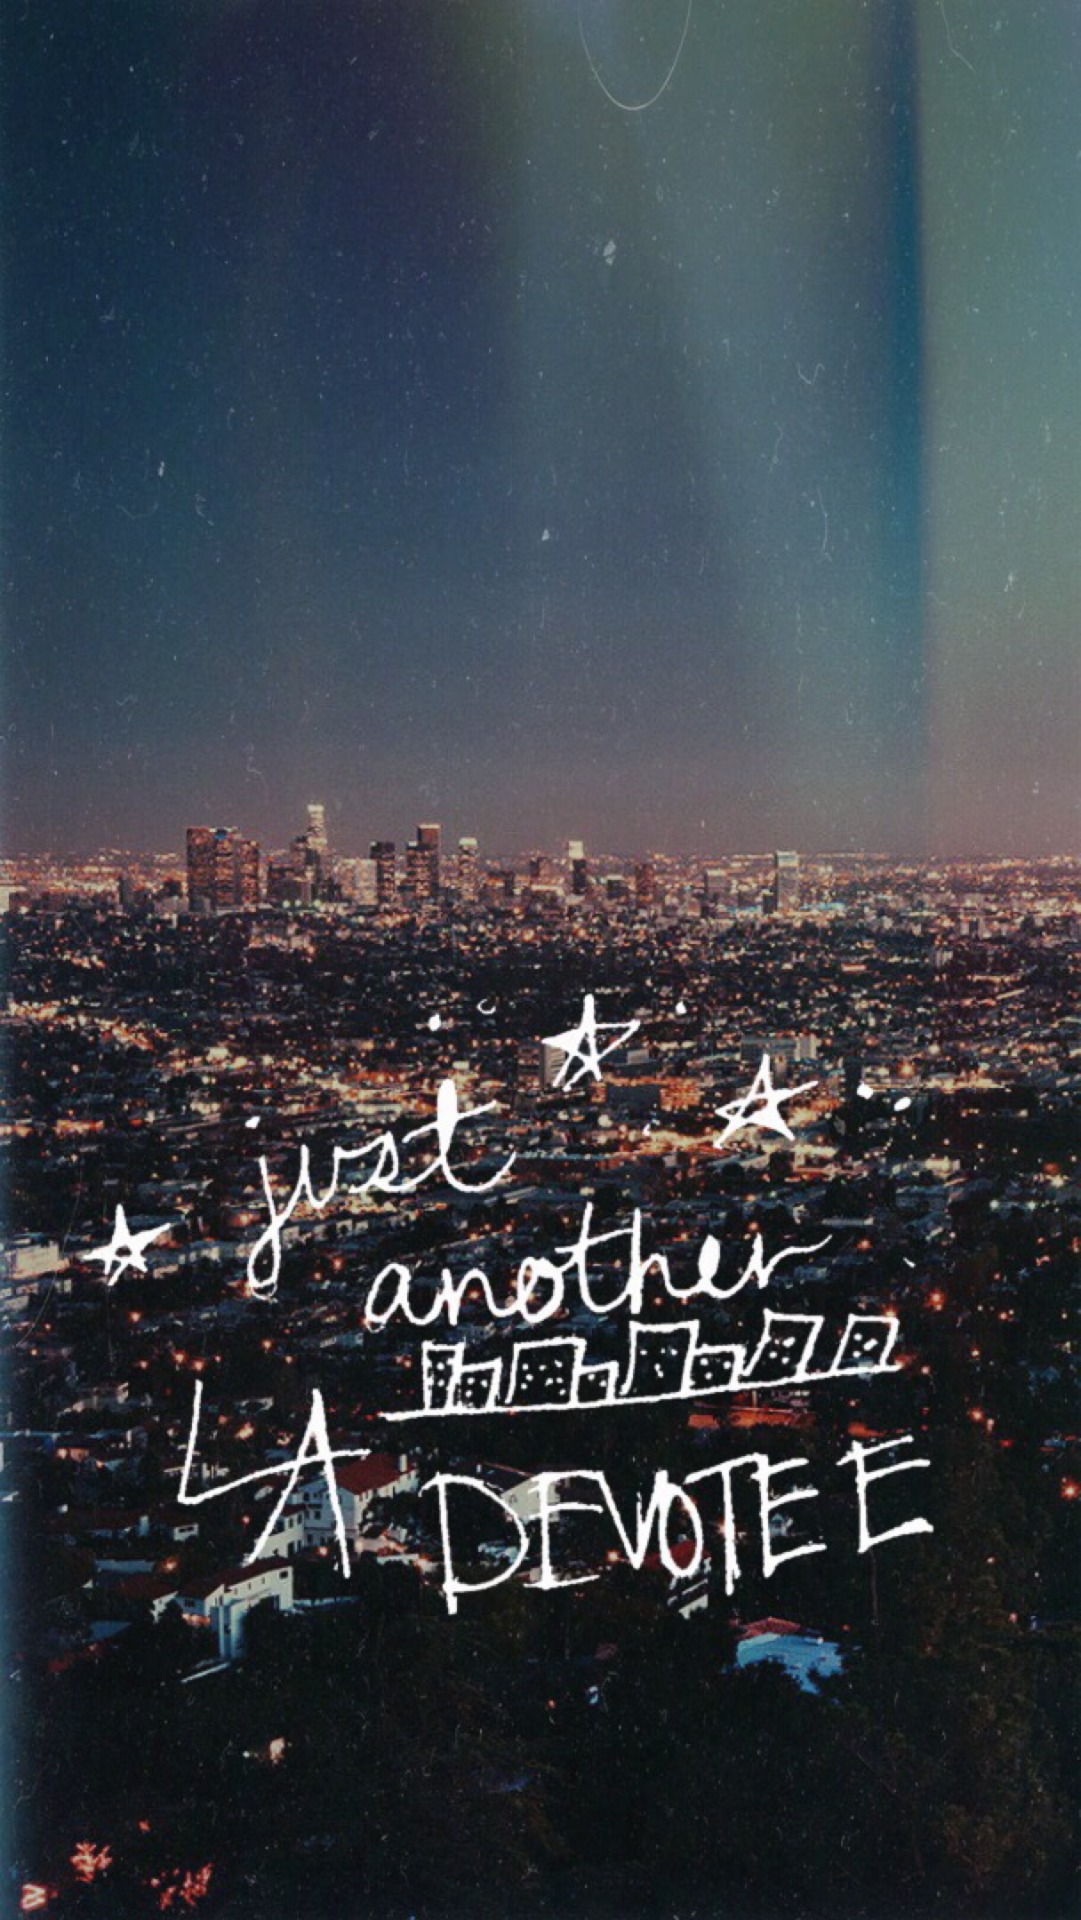 2) How About A Few Lyrics From La Devotee - Griffith Observatory , HD Wallpaper & Backgrounds